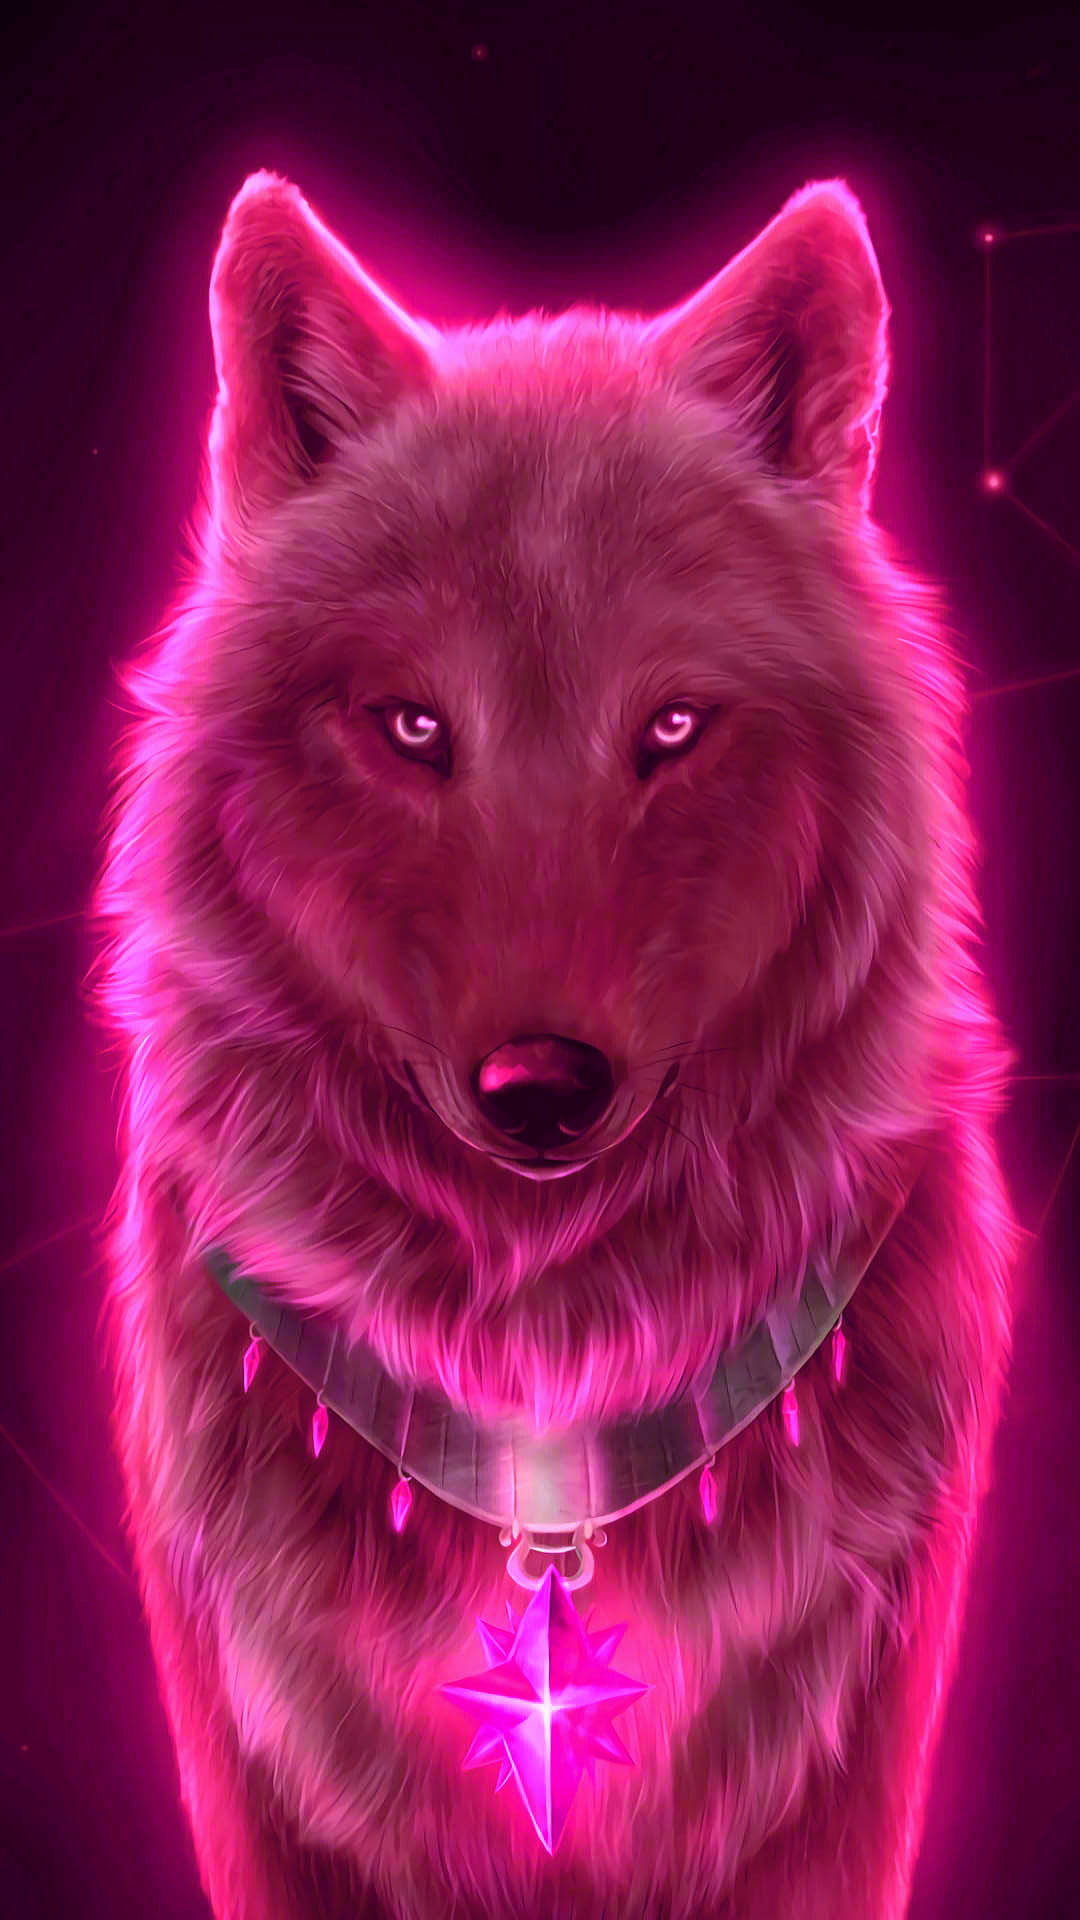 Anime Wolf Neon Pink With Necklace Wallpaper